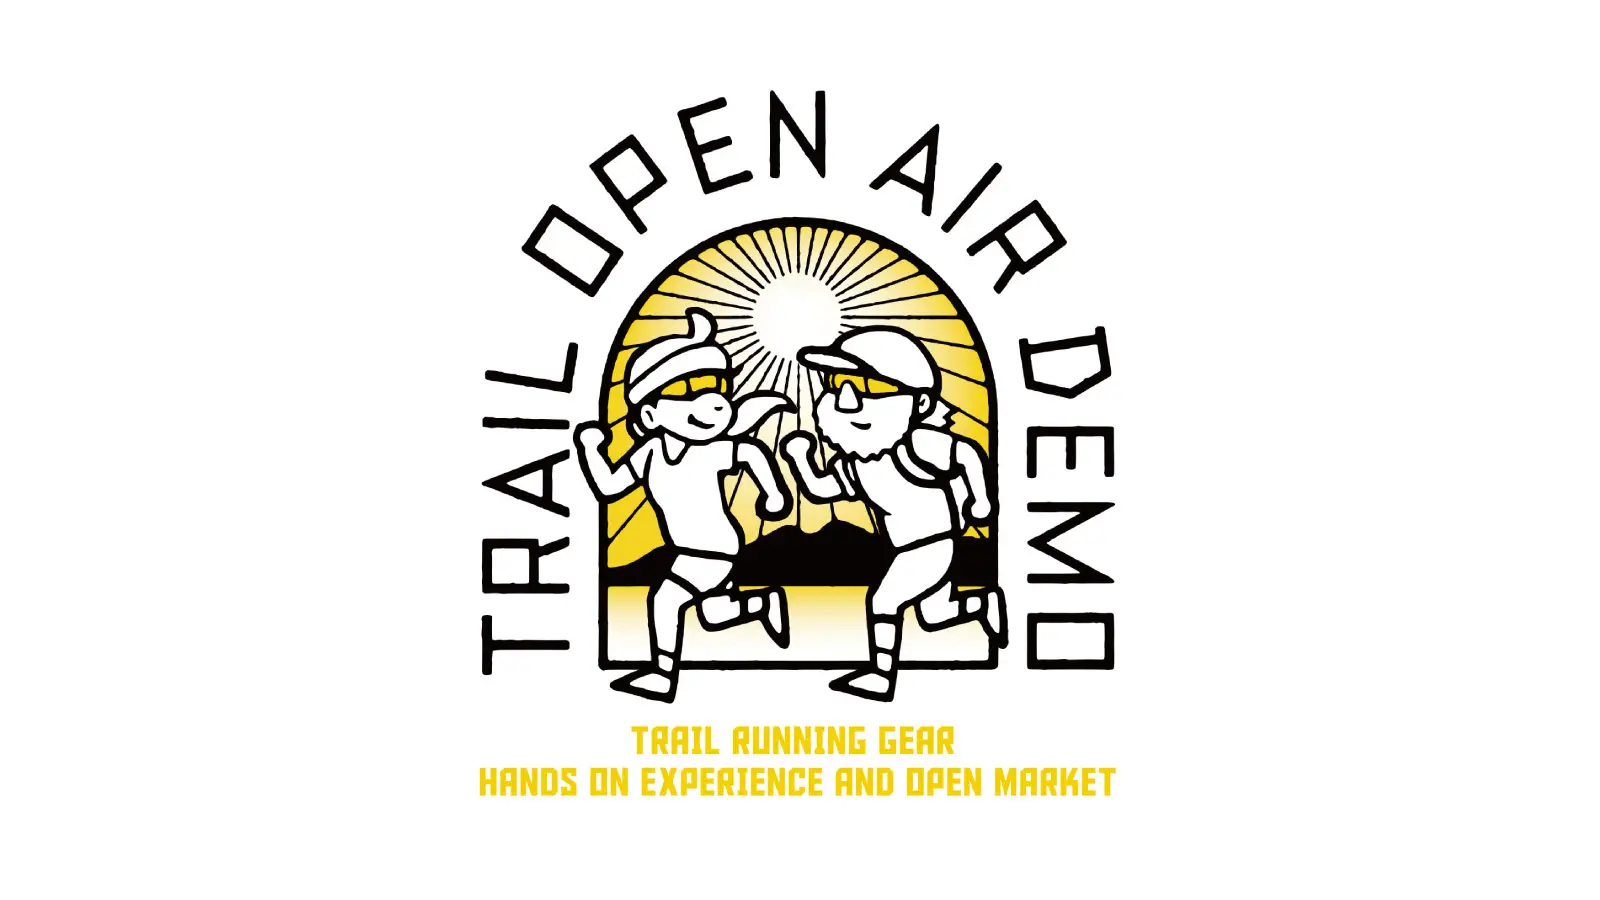 TRAIL OPEN AIR DEMO 10に出展します